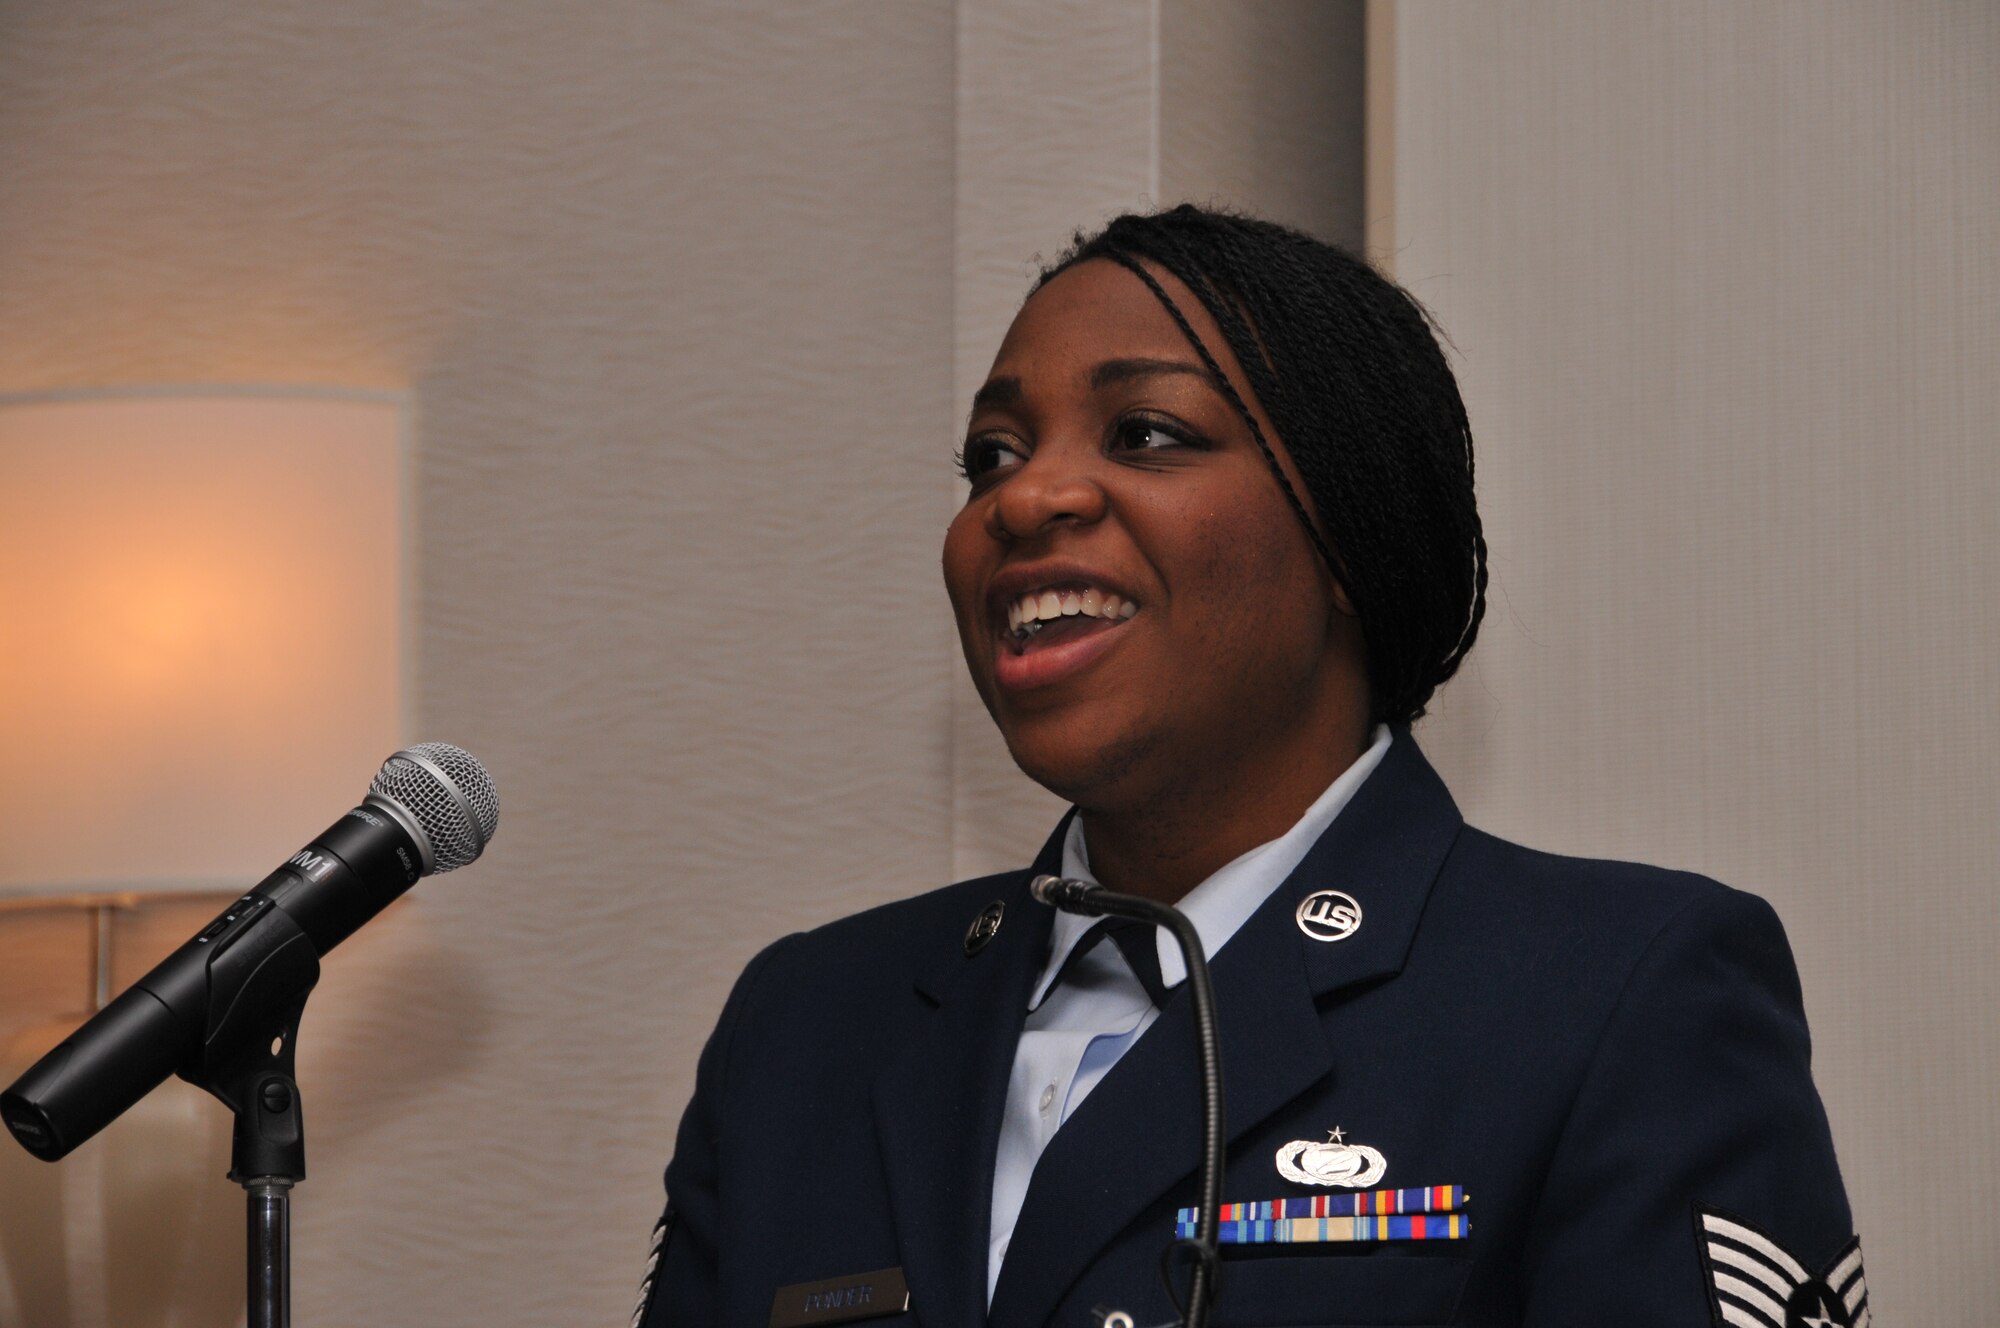 U.S. Air Force Staff Sgt. Michaela Diallo provides musical entertainment at the 171st Air Refueling Wing's 32nd annual African-American Heritage Luncheon, Friday, Feb. 27, 2015, at the Pittsburgh Airport Marriott in Coraopolis, Pa. The event allowed the 171st ARW to celebrate "A Century of Black Life, History, and Culture" with the local community during African-American History Month. (U.S. Air National Guard photo by Airman 1st Class Allyson L Manners/ Released)